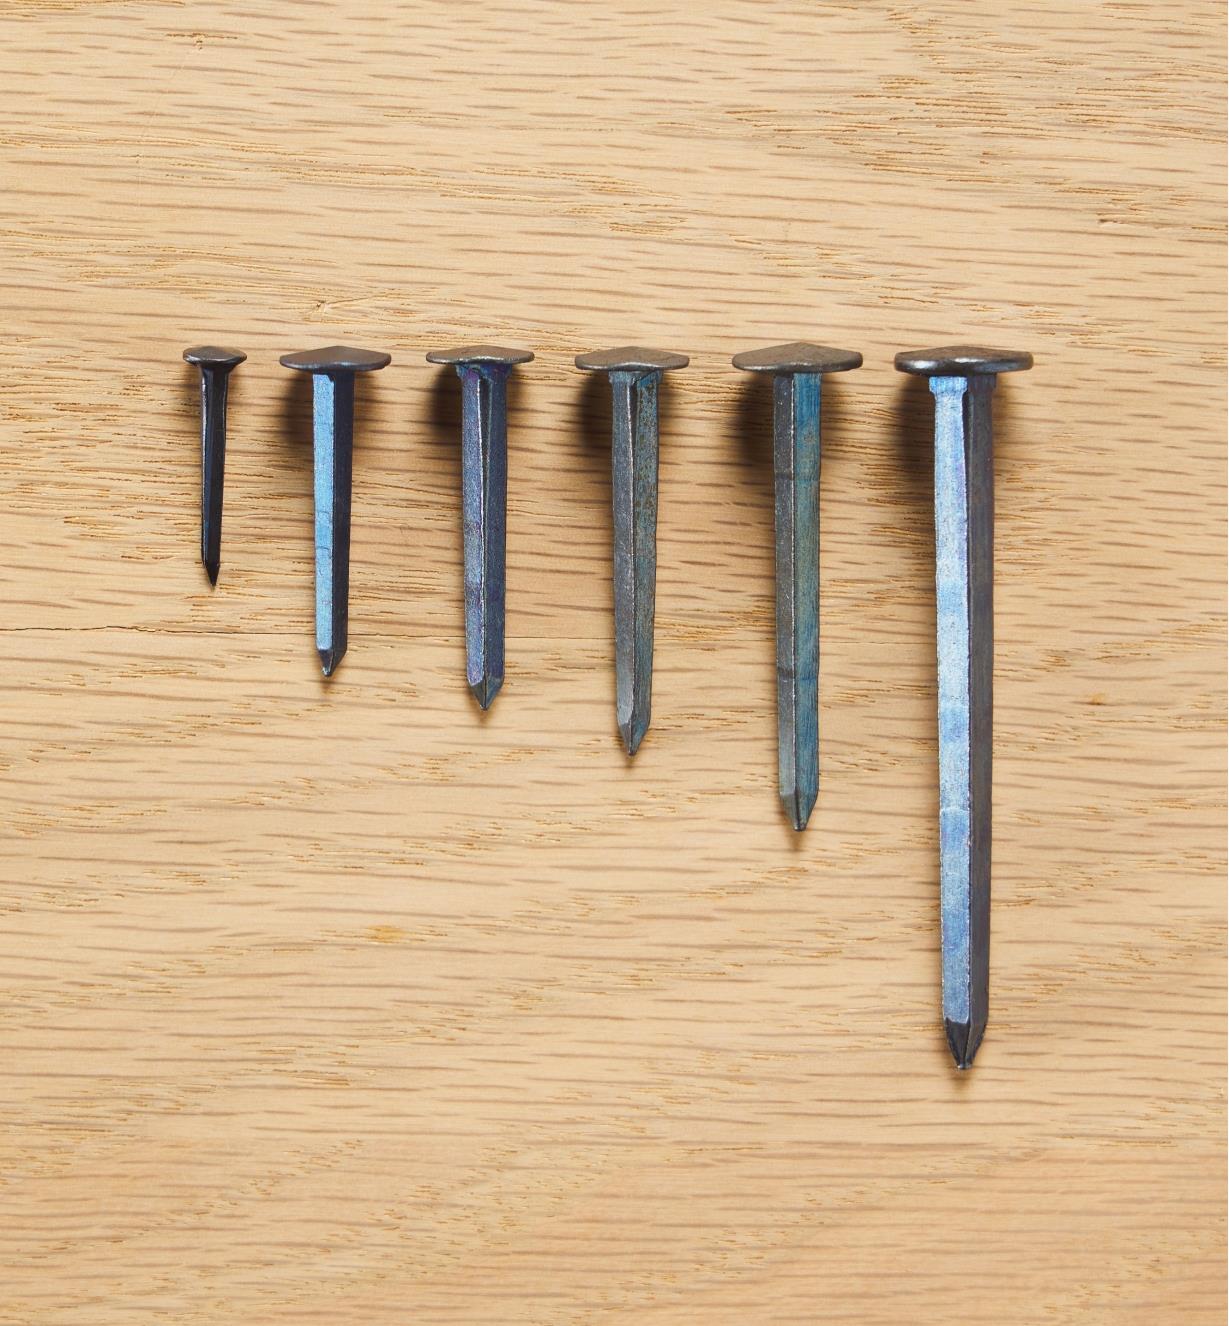 Blued Steel Diamond-Head Forged Nails from Clouterie Rivierre